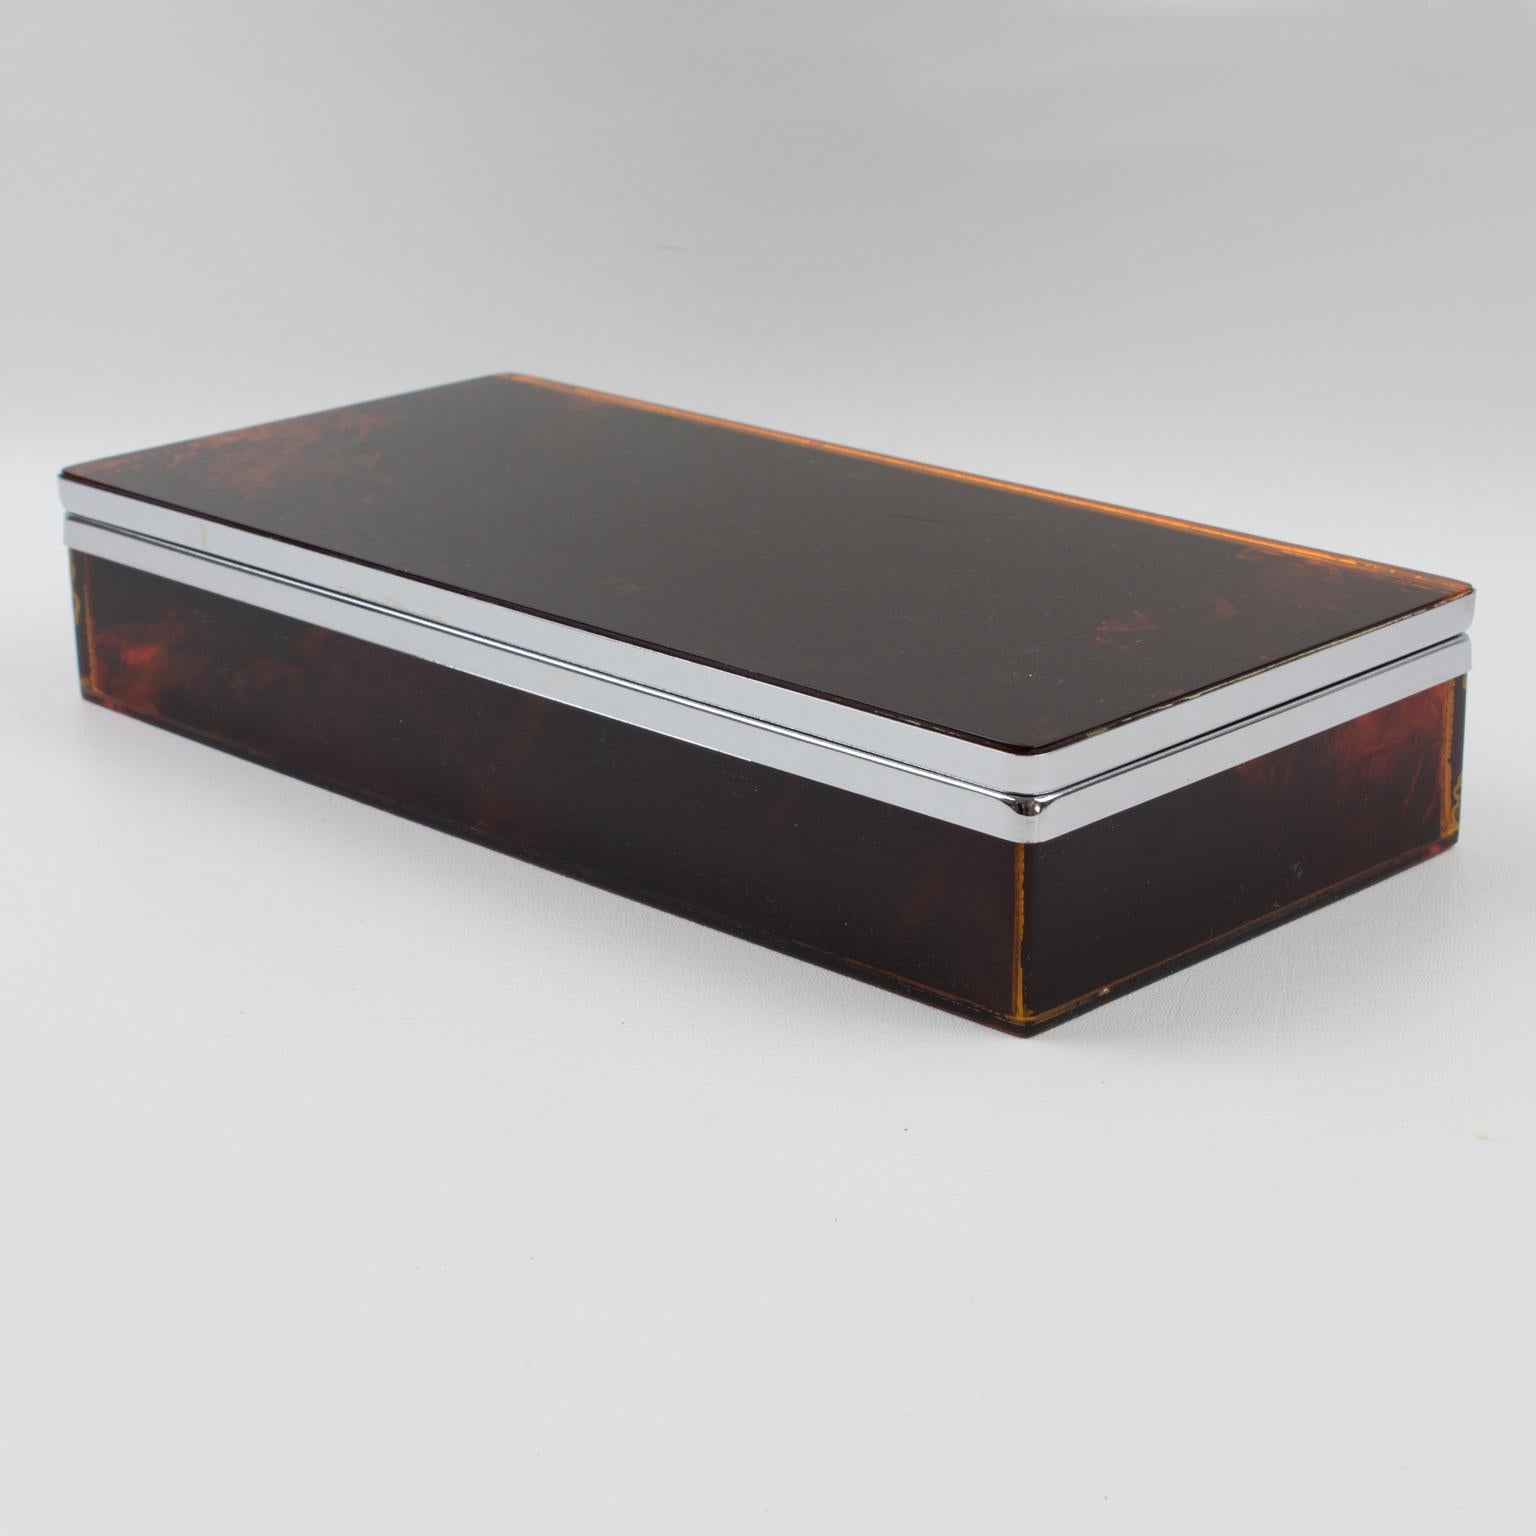 This elegant 1970s decorative lidded box is perfect for living space or vanity decoration. The chrome-plated framing is complimented with Lucite elements in a tortoiseshell (tortoise) textured pattern. The quality is impressive, especially with this